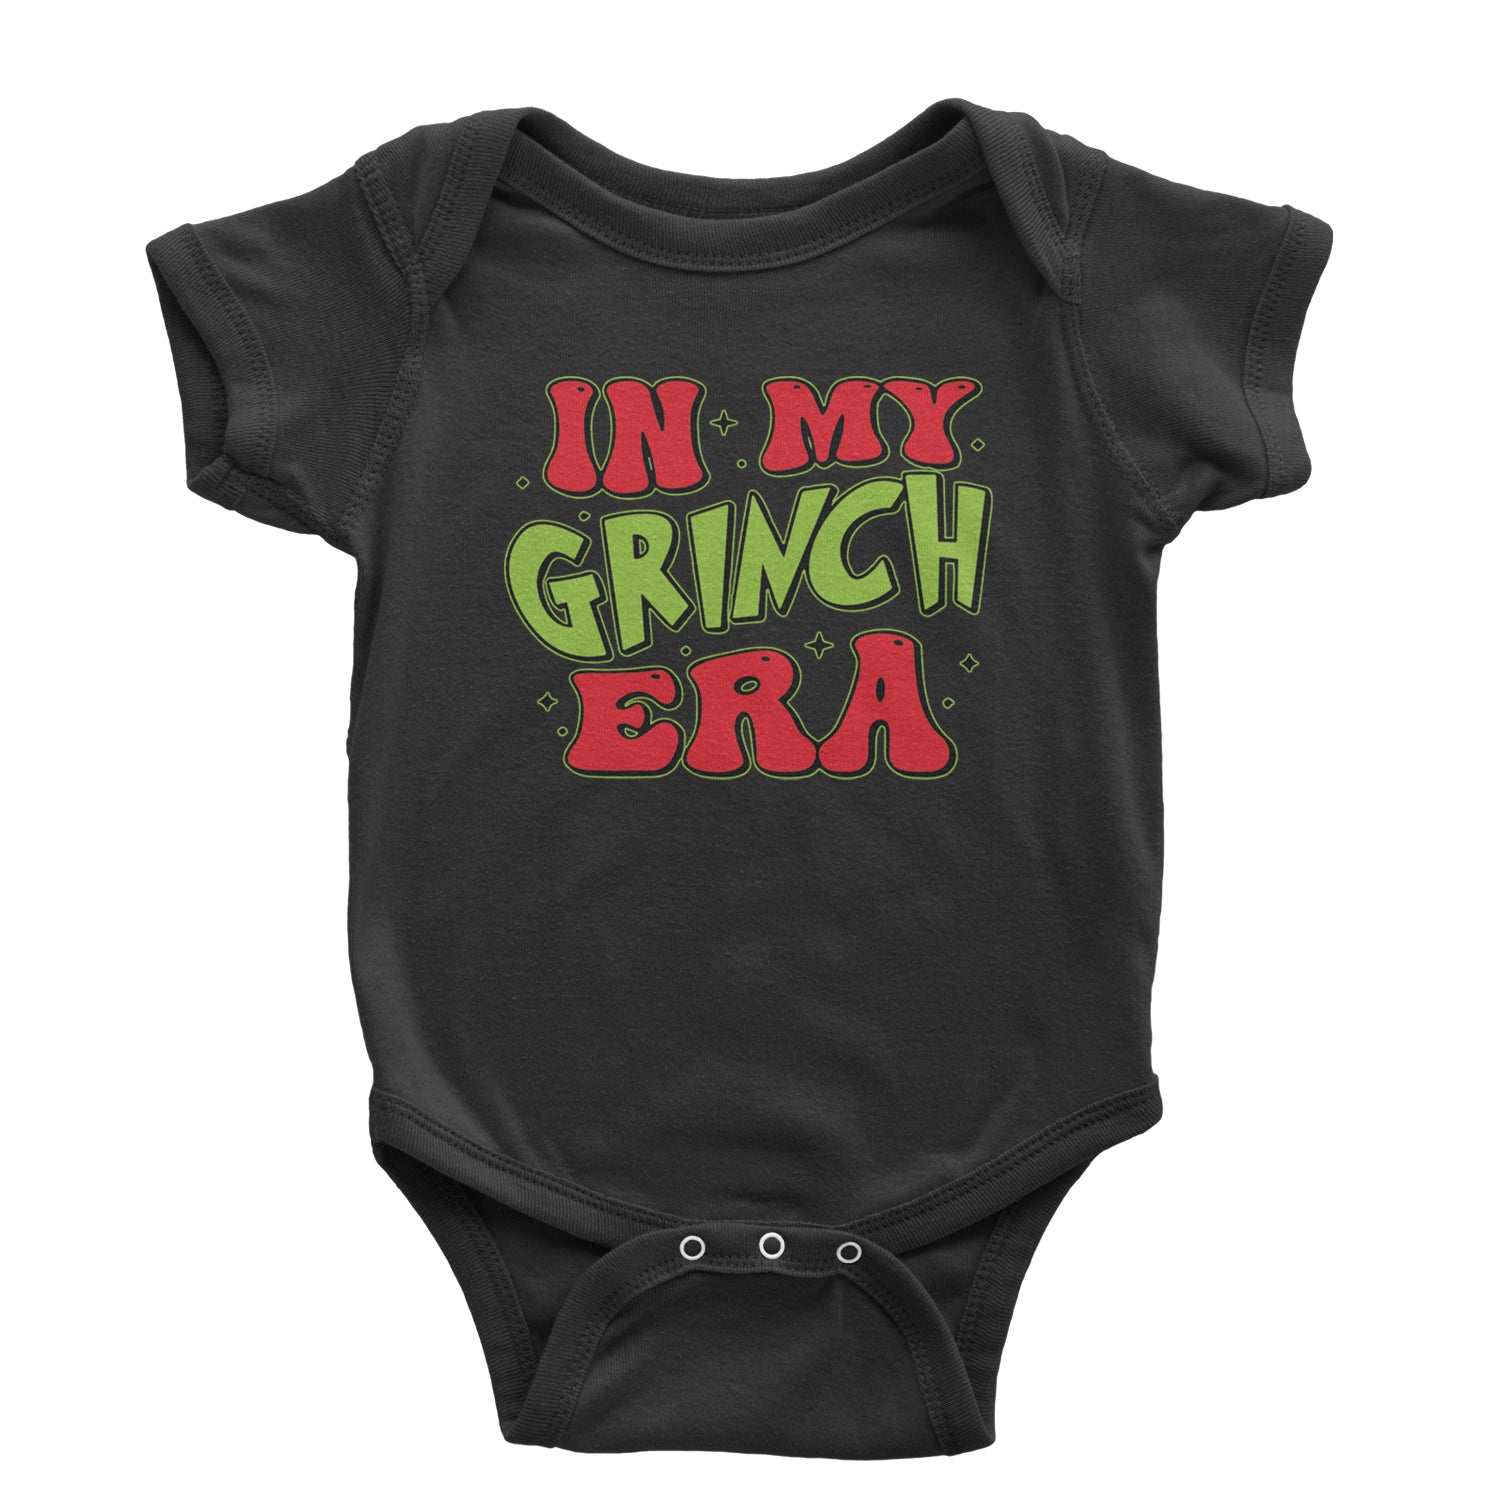 In My Gr-nch Era Jolly Merry Christmas Infant One-Piece Romper Bodysuit and Toddler T-shirt